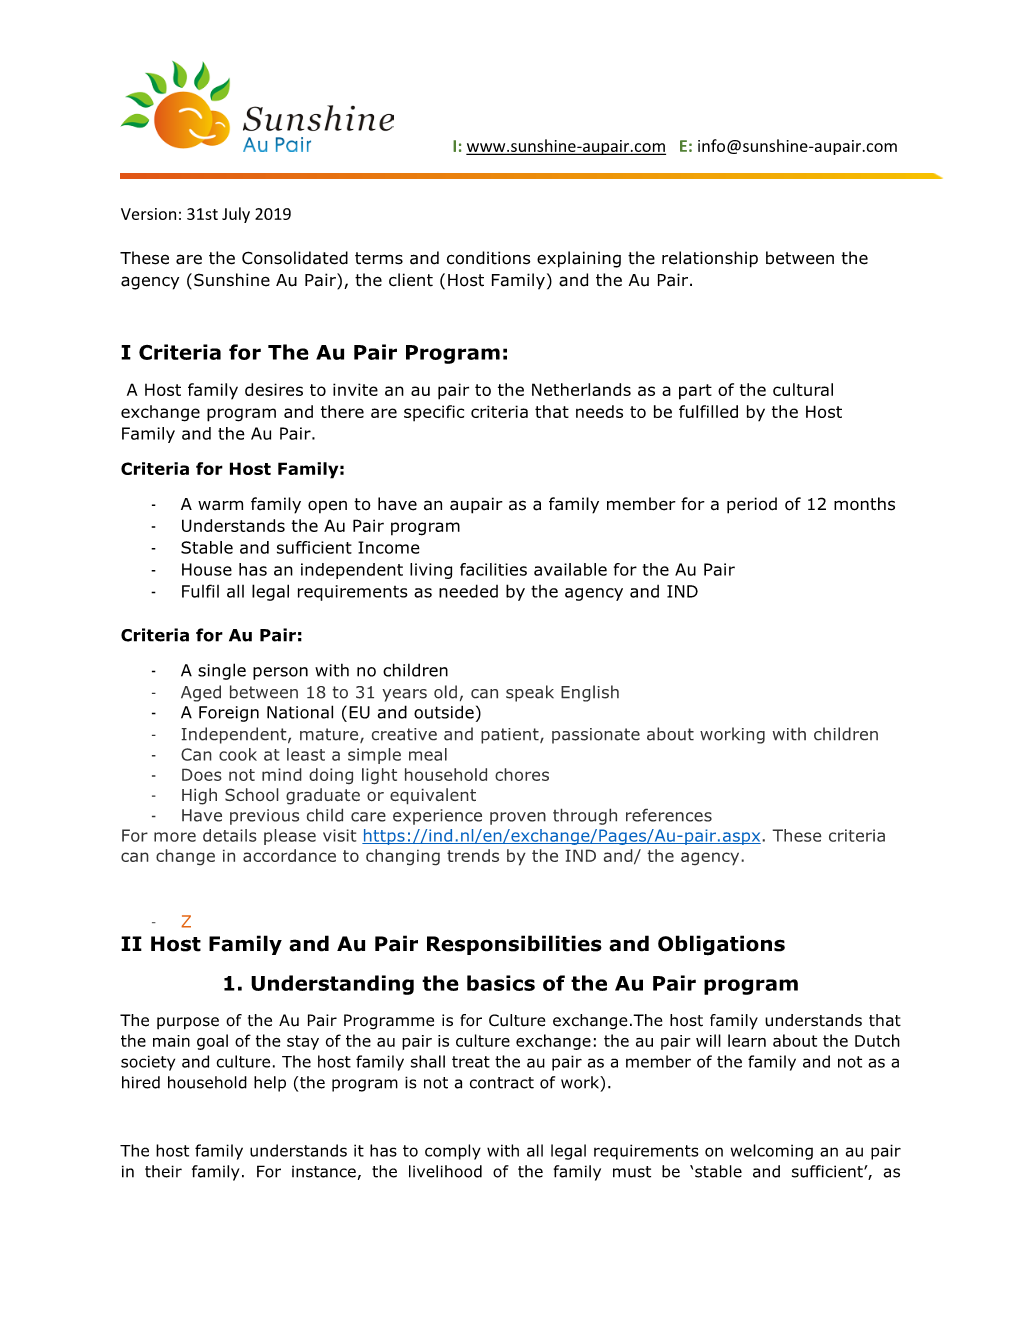 II Host Family and Au Pair Responsibilities and Obligations 1